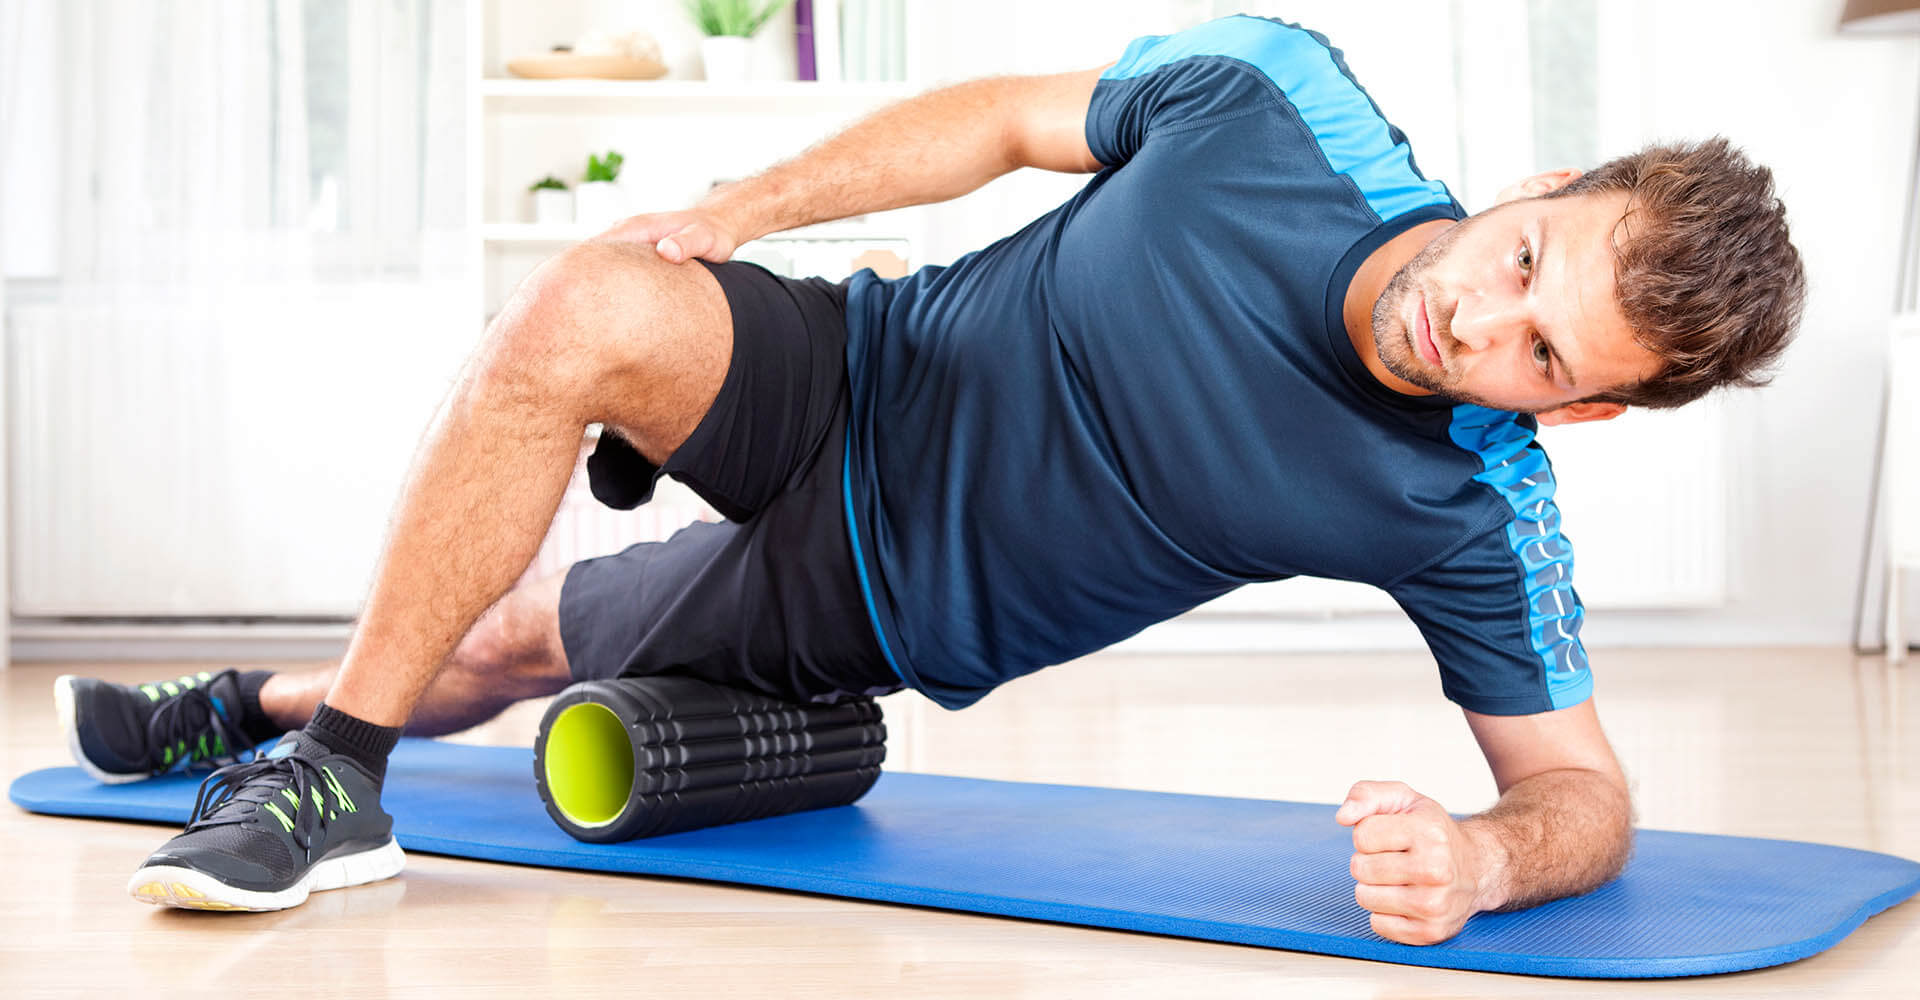 Man trains at home on isomat and fascia roller